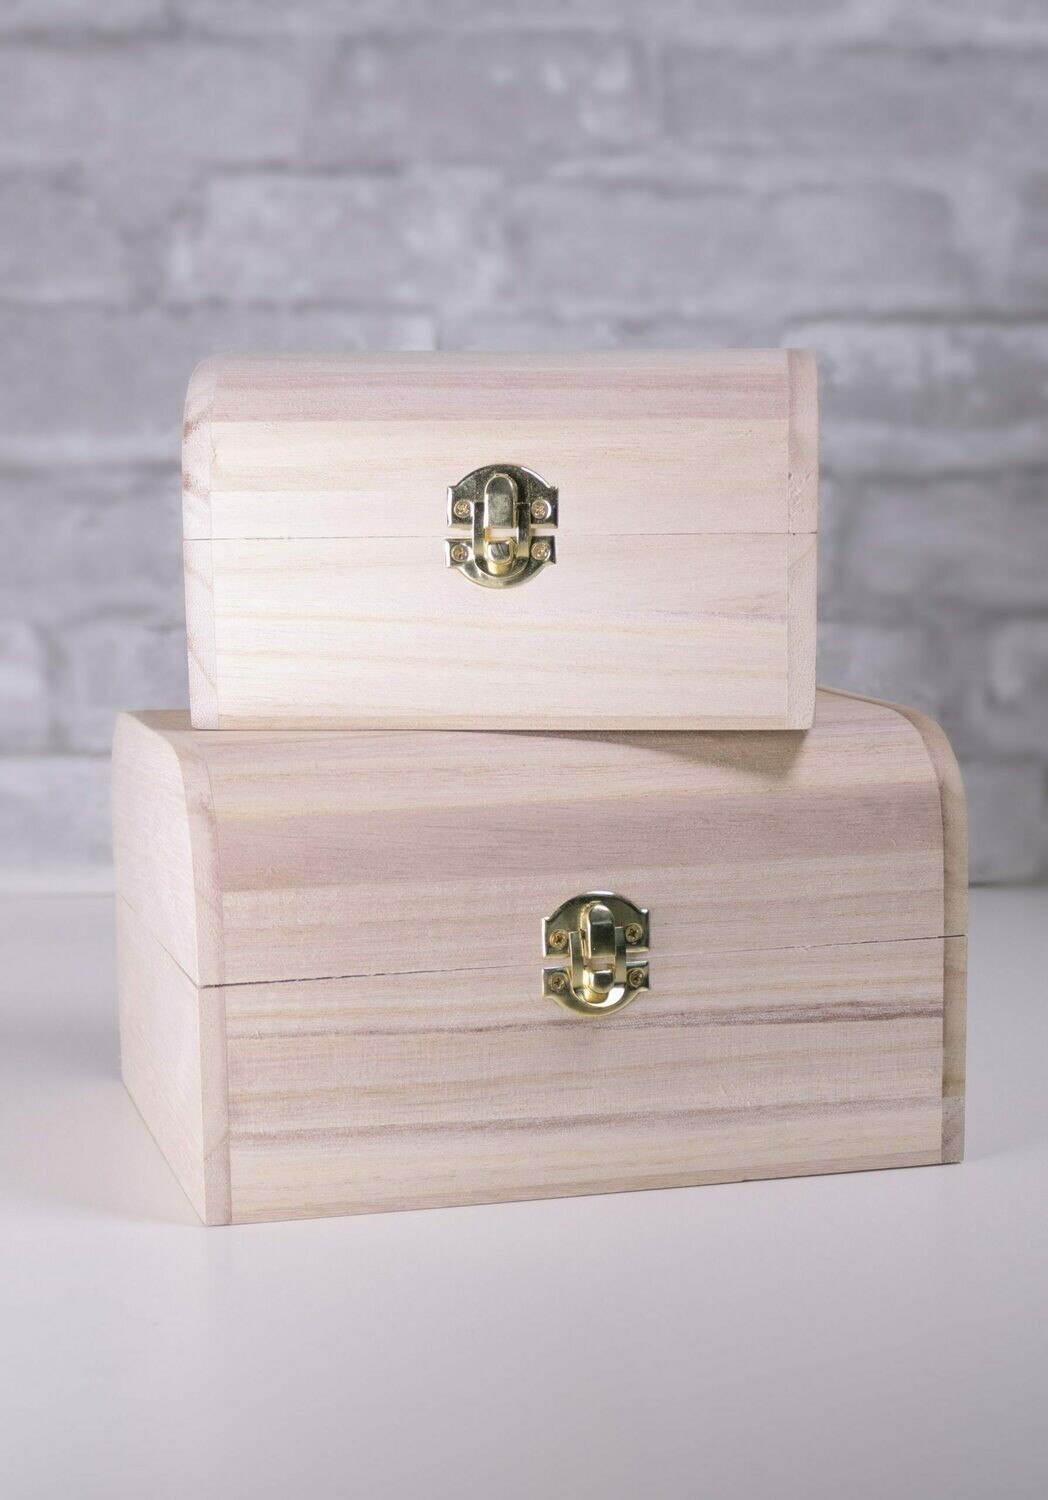 Nesting Wood Boxes With Hinges. Set of Two With Rounded Edges.